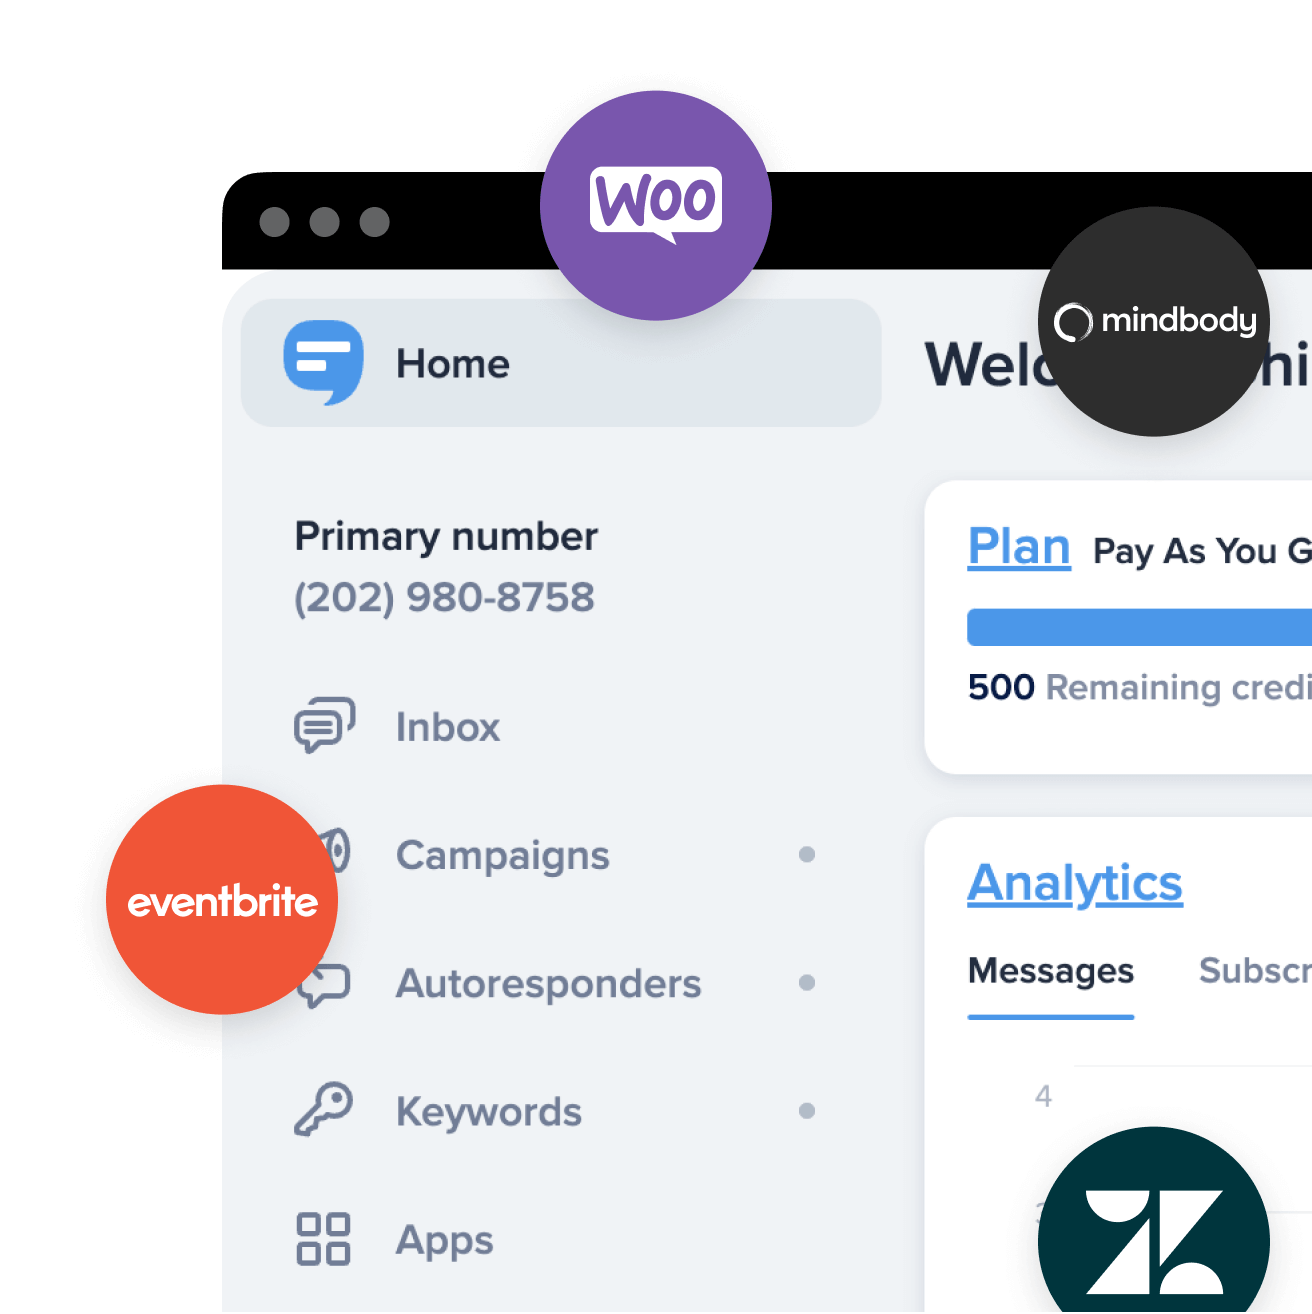 This collage shows the SimpleTexting’s texting service interface with several logos on top, including WooCommerce, Mindbody, Zendesk, and Eventbrite. These are all services that can be integrated with SimpleTexting.